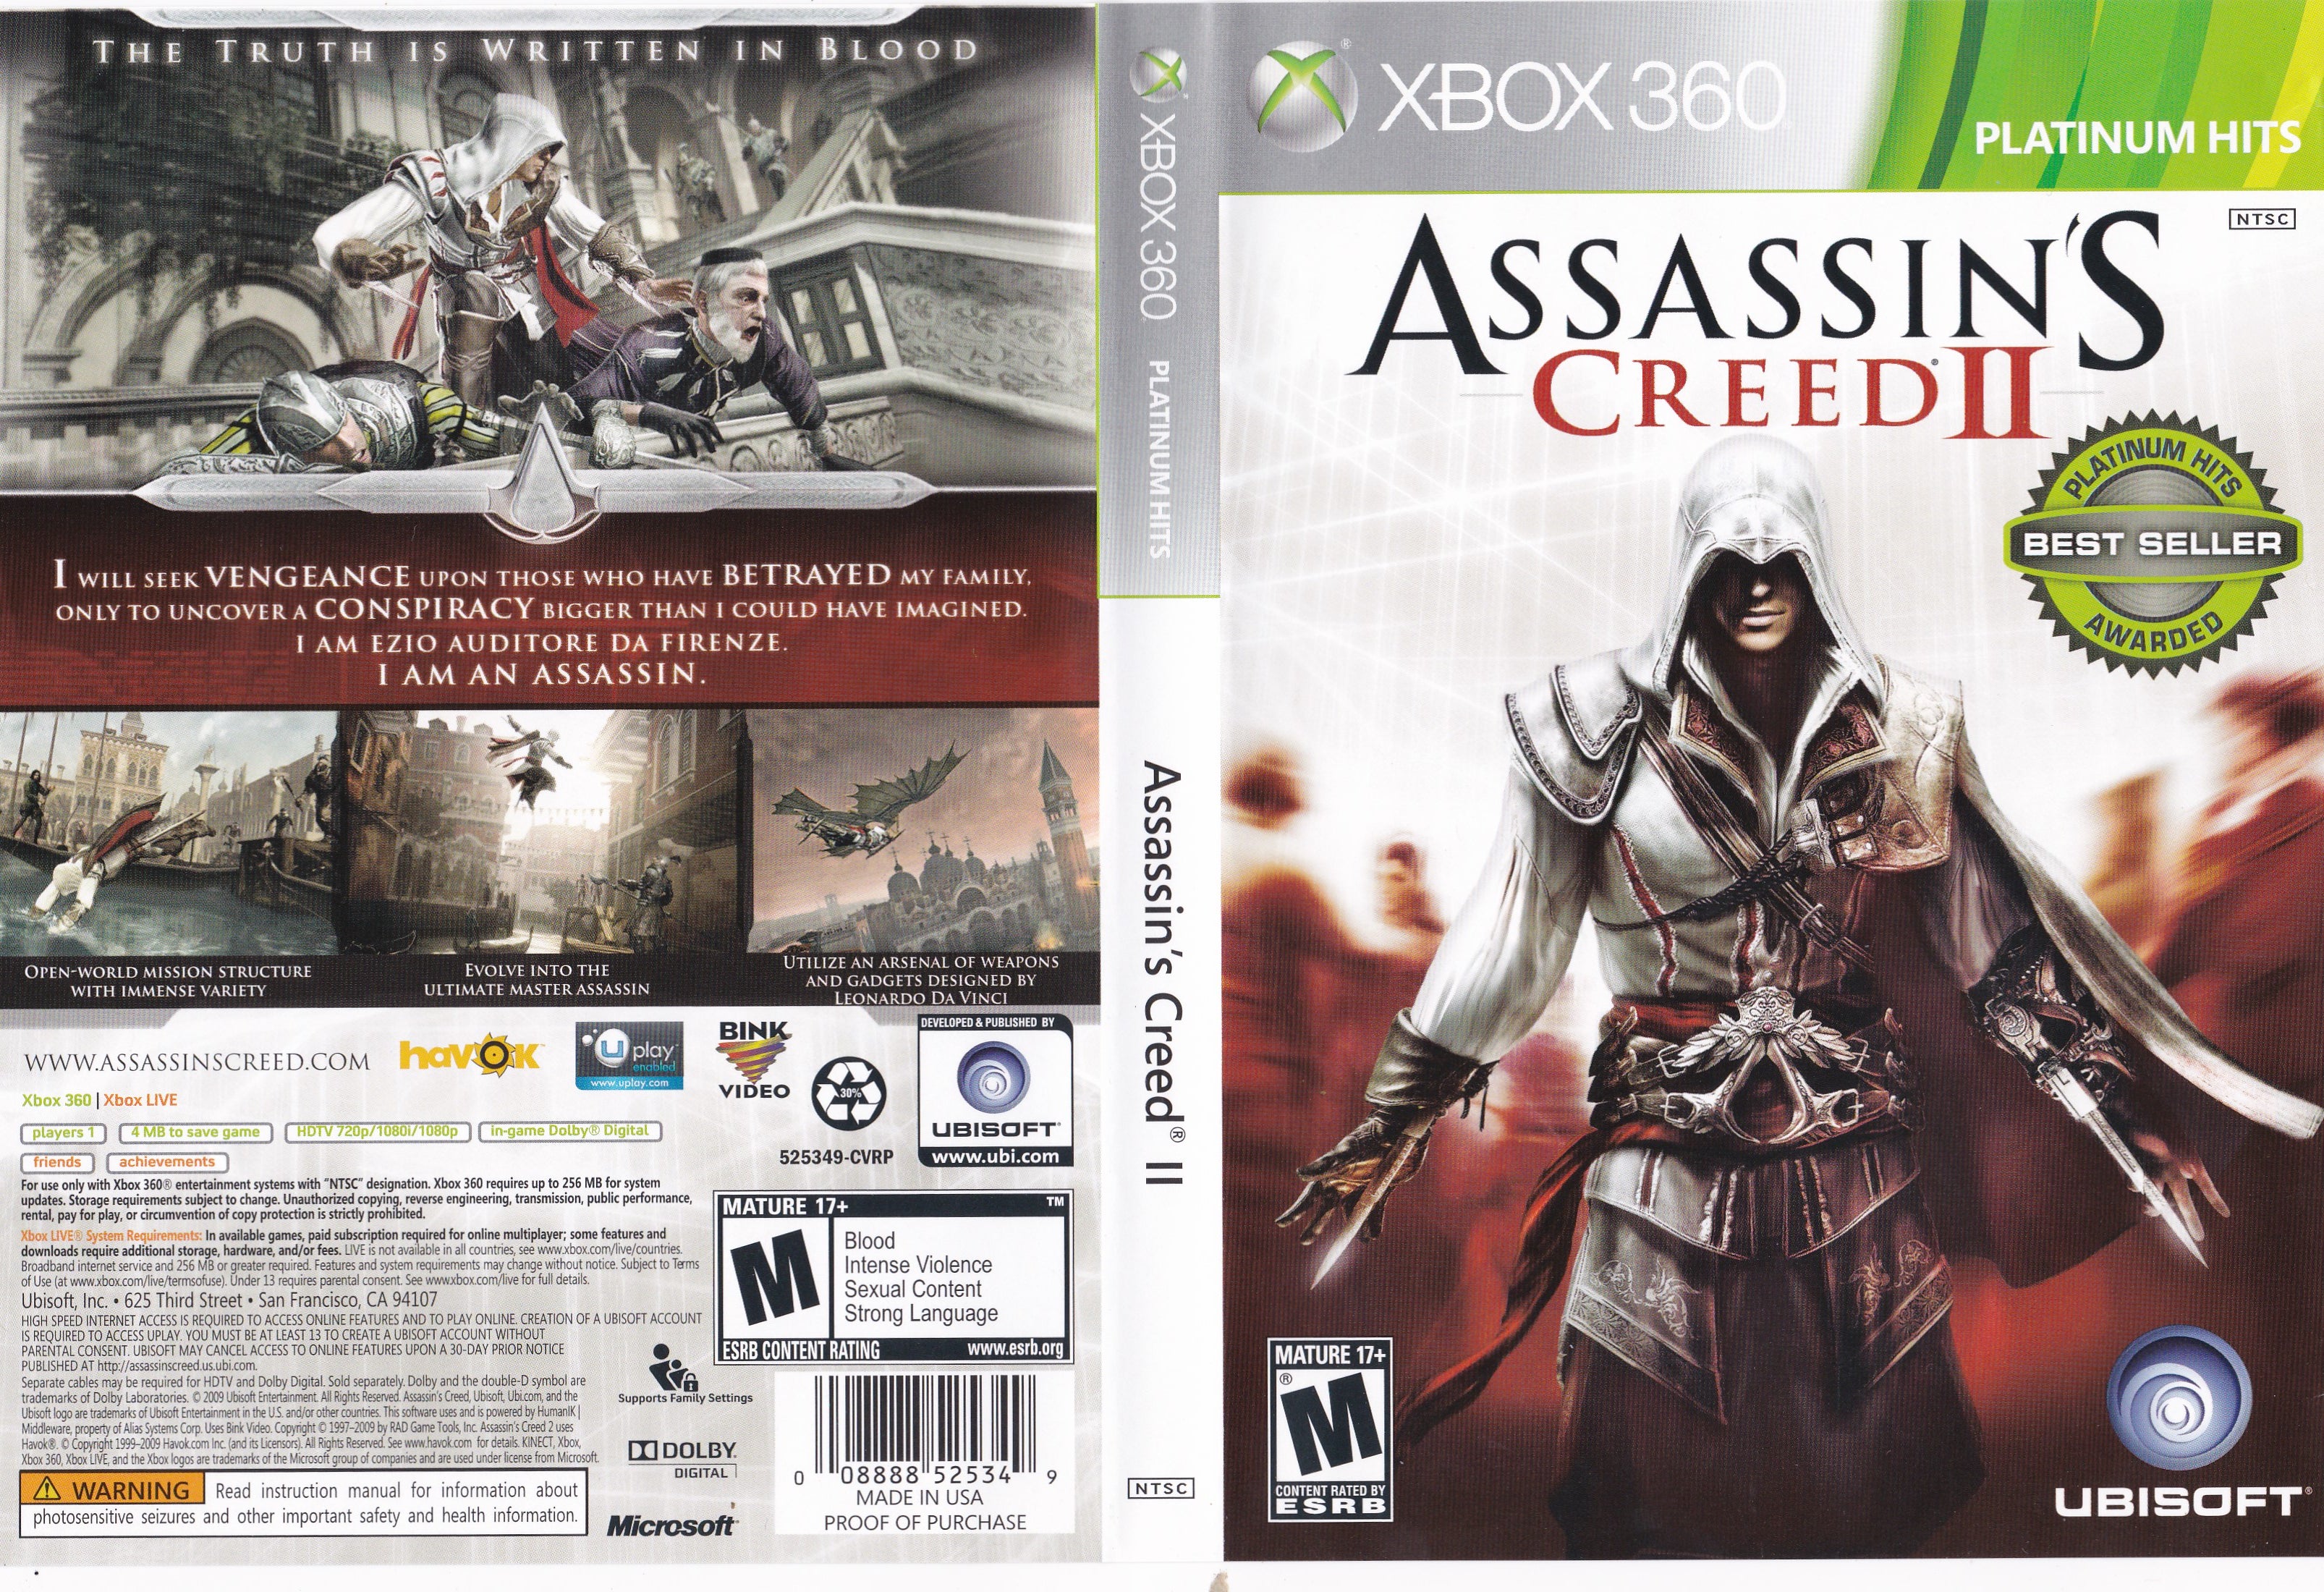 Assassin s xbox 360. Ассасин на Xbox 360. Assassins Creed 2 диск. Assassin's Creed 1 Xbox 360 Disc. Ассасин Крид 4 на Xbox 360.